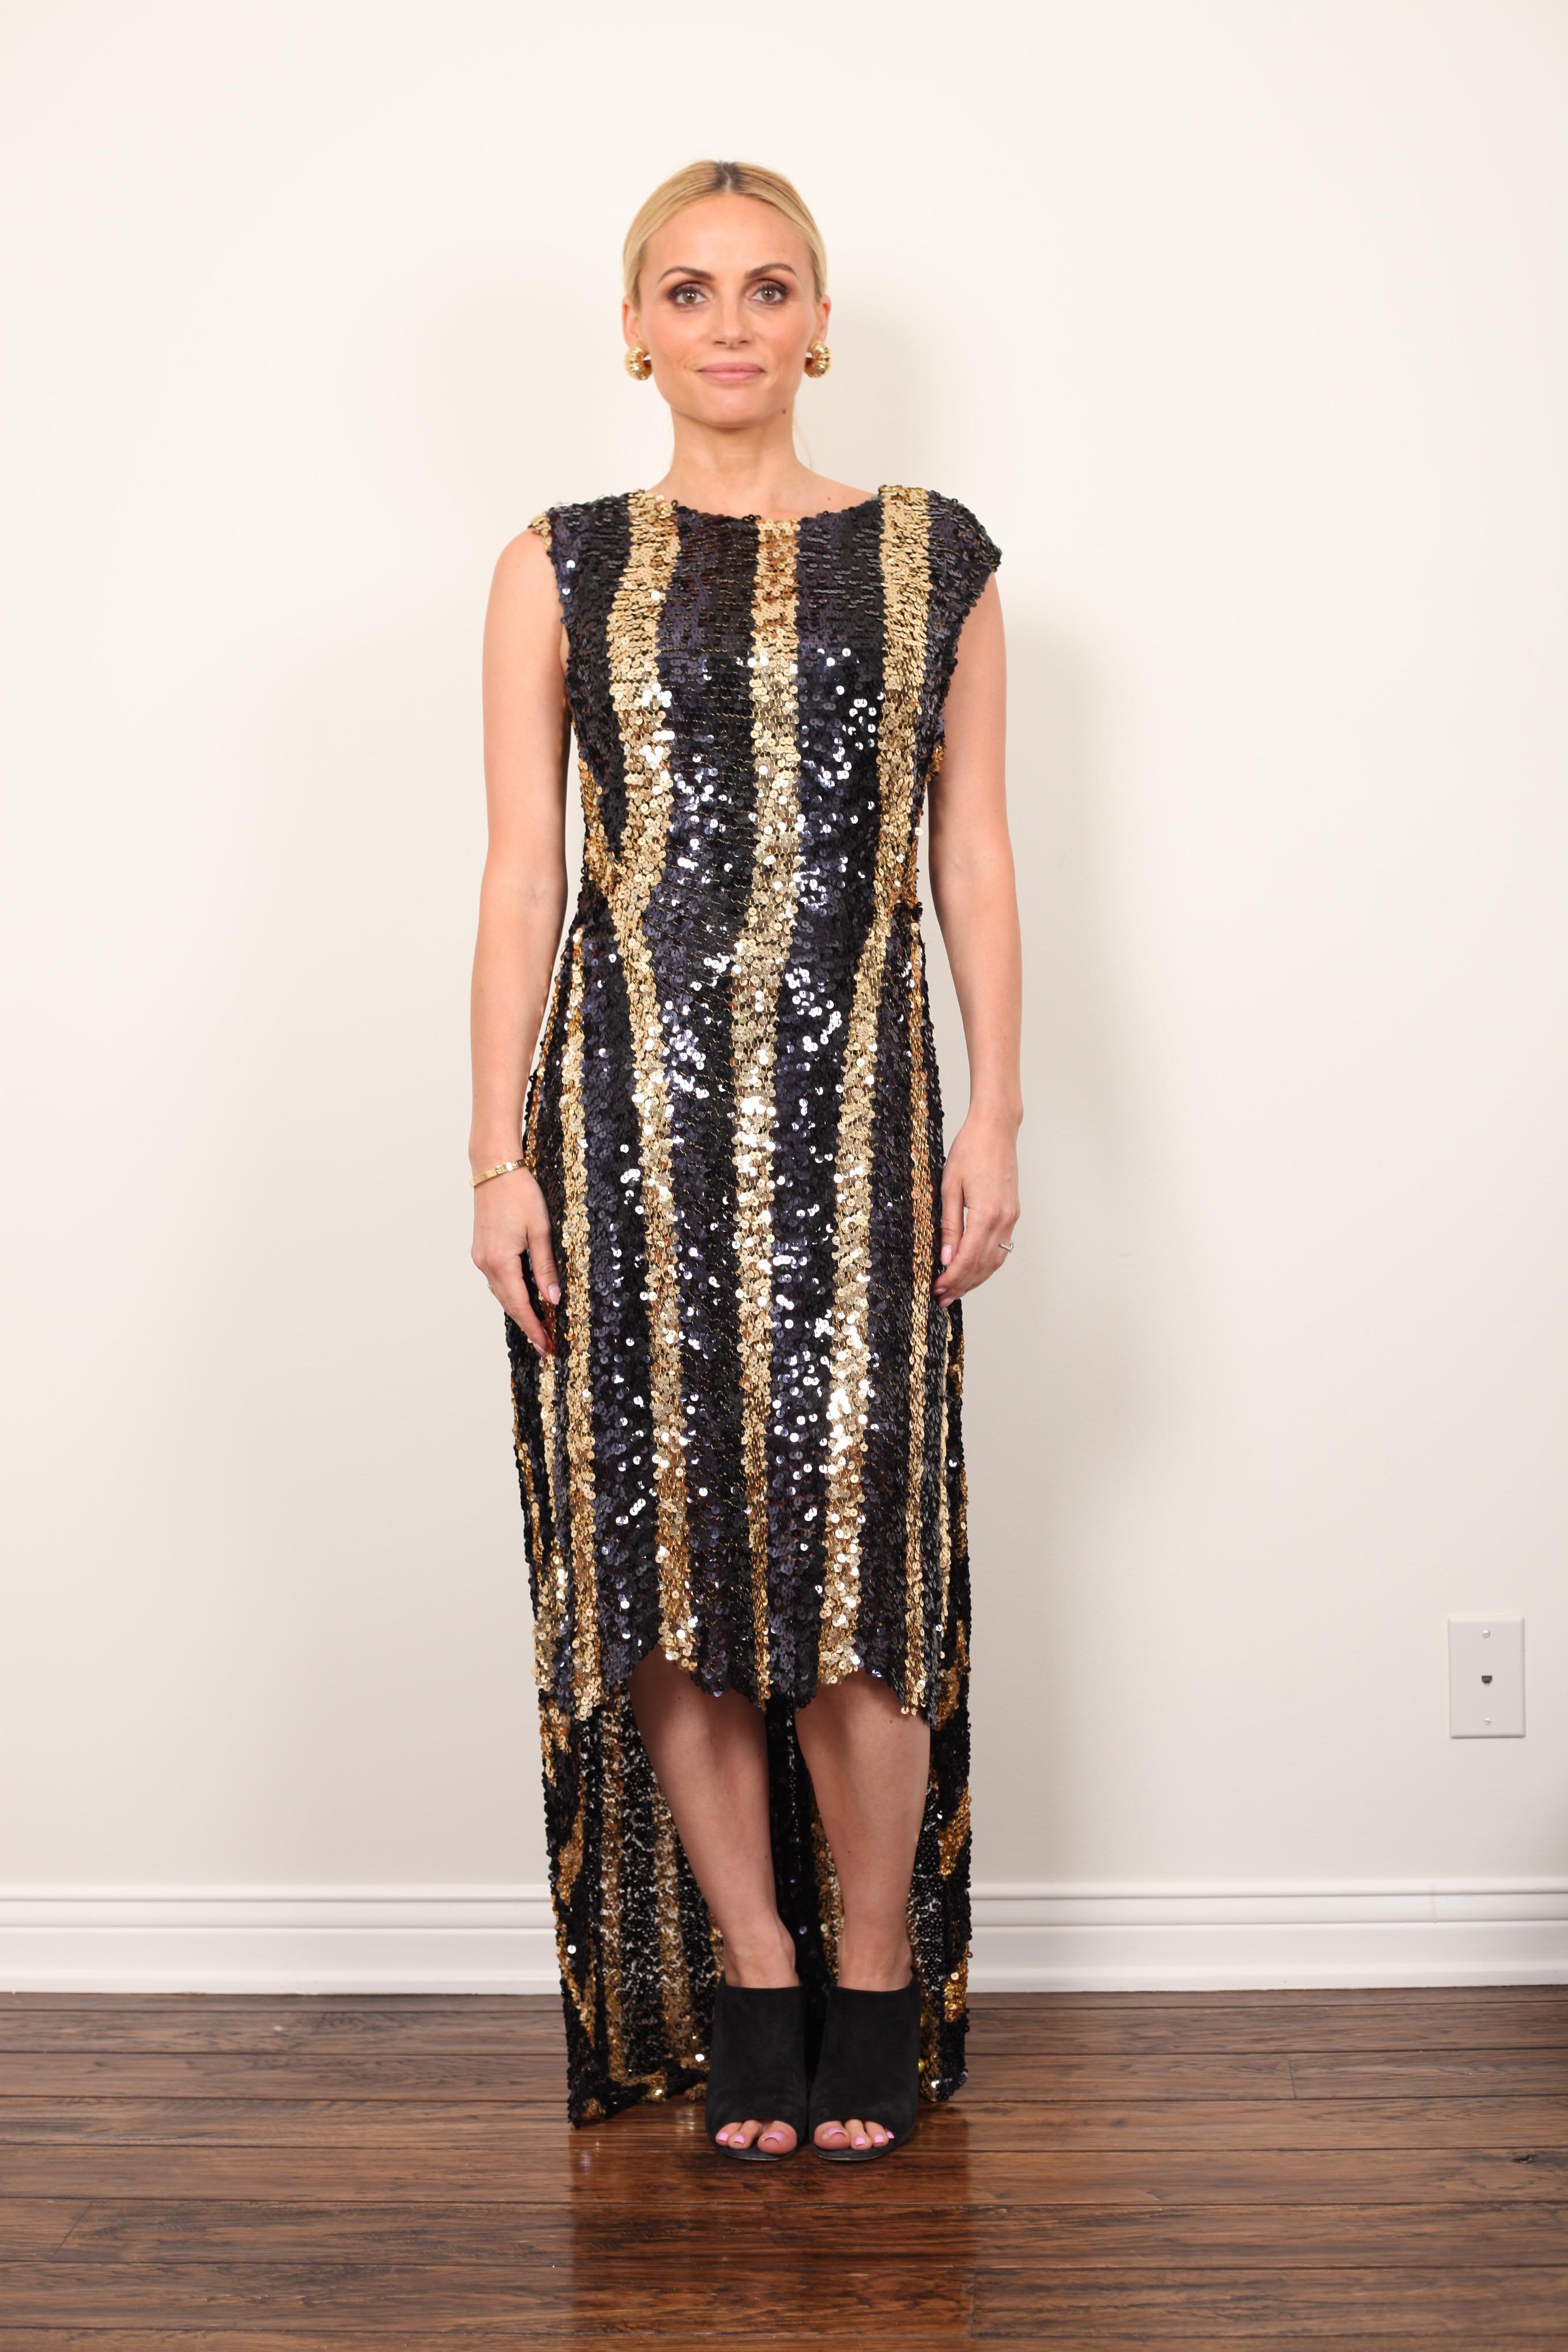 Super funky black and gold vertical stripe sequin dress by Sonia Rykiel. This dress is sleeveless with a high-low hemline. 
The back hem is floor length with a slight train while the front hits above the knee. 
Very comfortable ! 
Size US 10 (fits